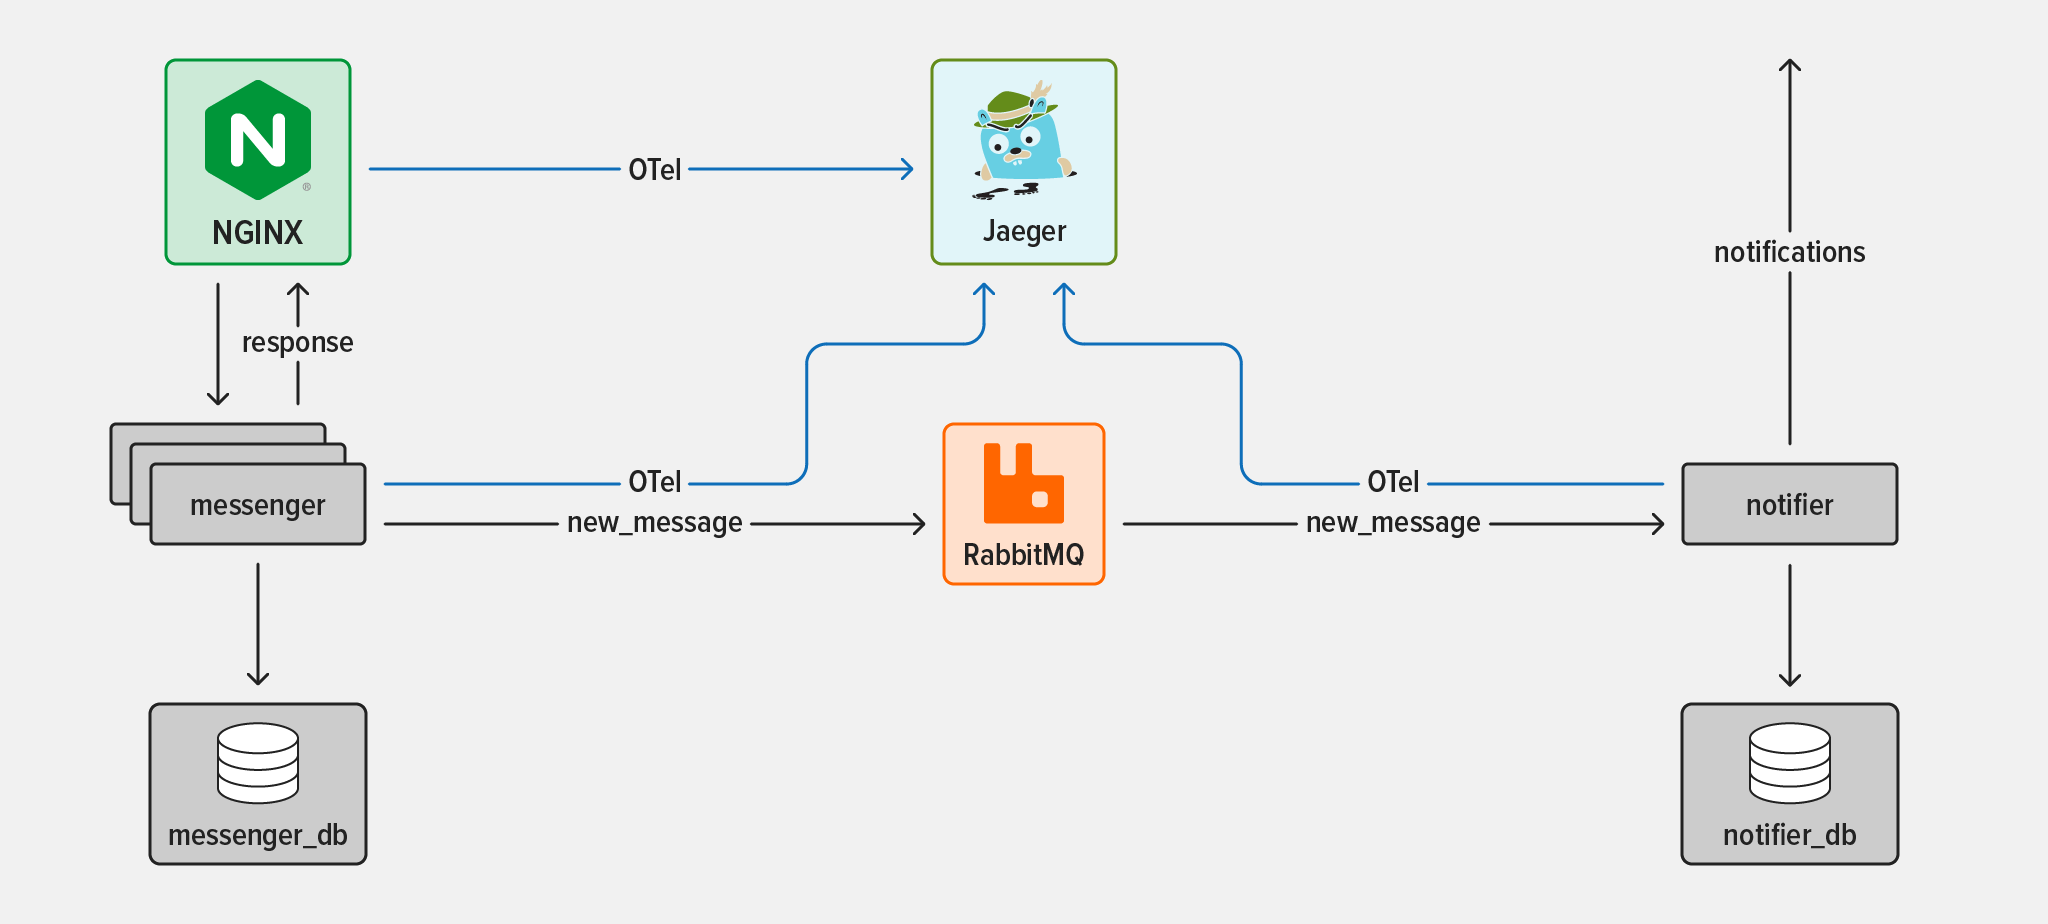 Diagram showing topology used in tutorial, with OpenTelemetry tracing of a messaging system with two microservices, NGINX, and RabbitMQ